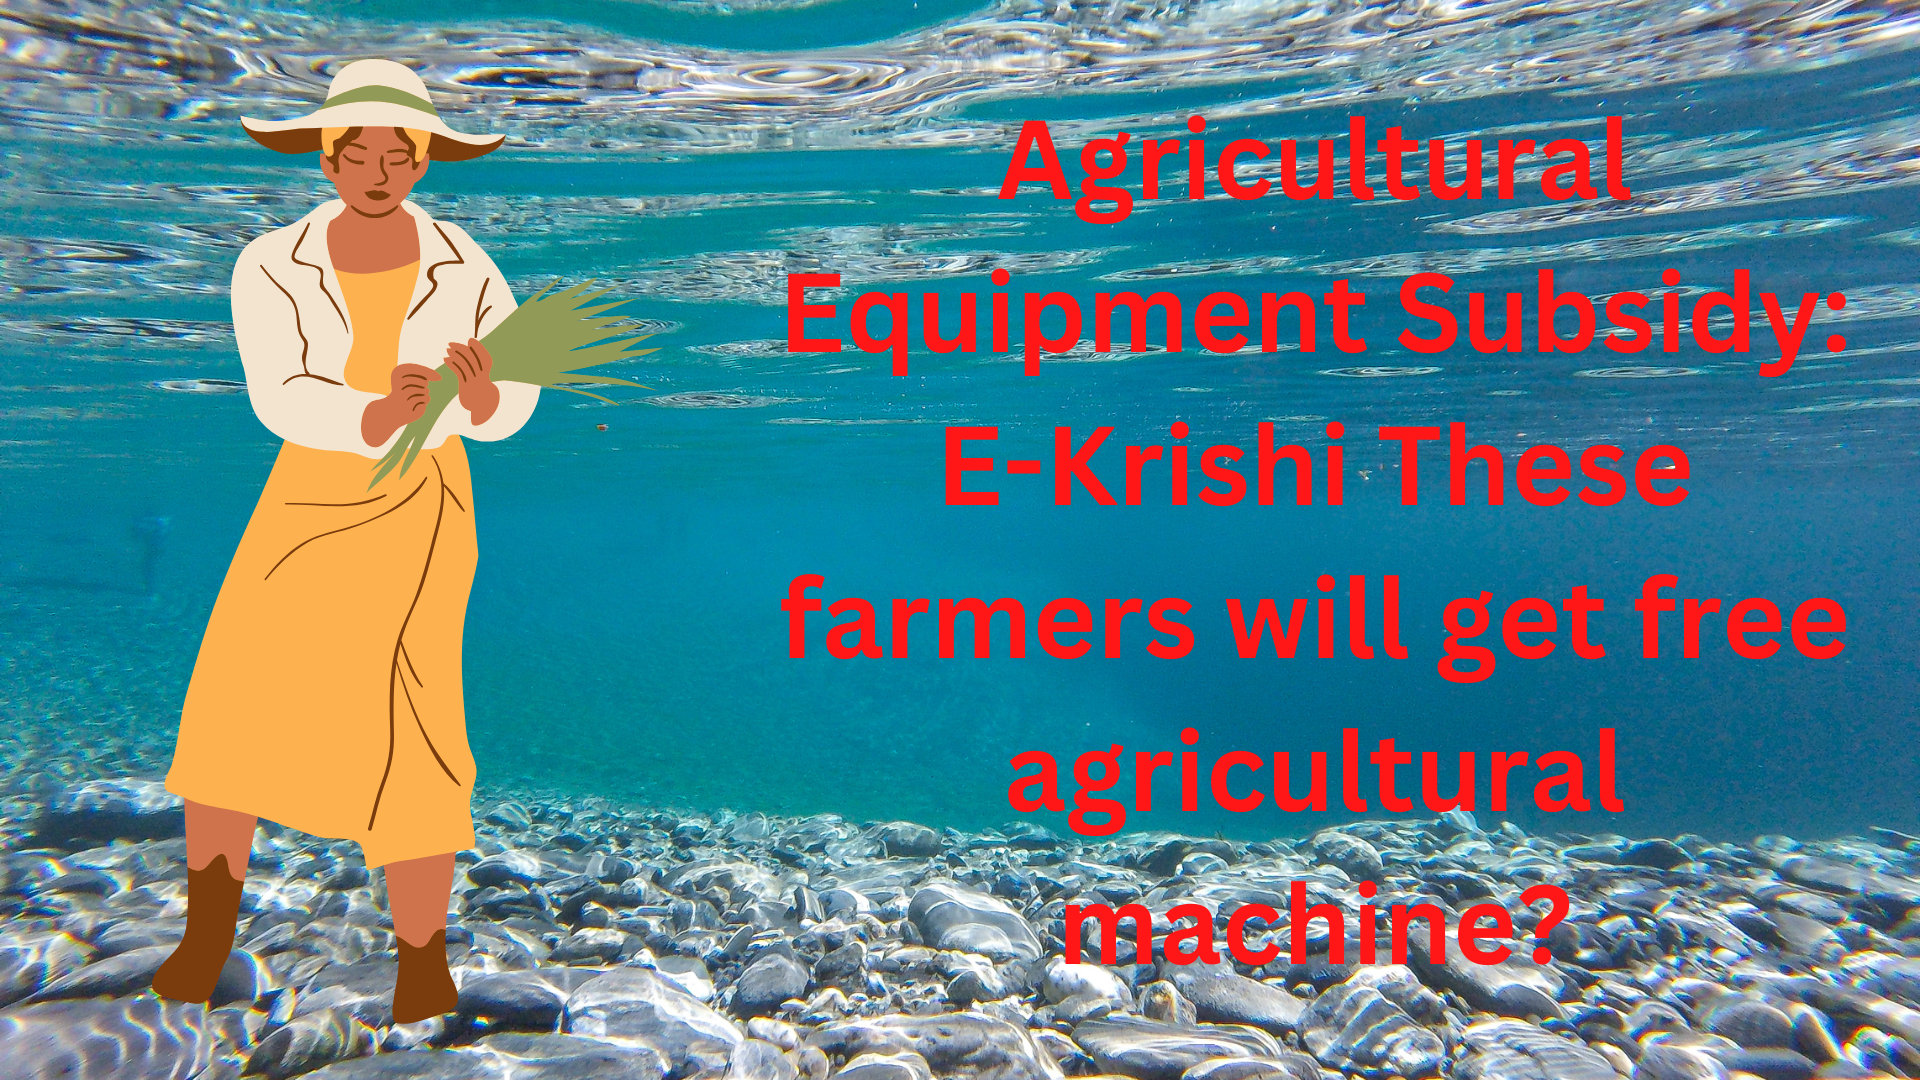 Subsidy: E-Krishi Free farm equipment for these farmers? | Agricultural Equipment Subsidy: E-Krishi Will this agricultural equipment be provided at no cost to these farmers?